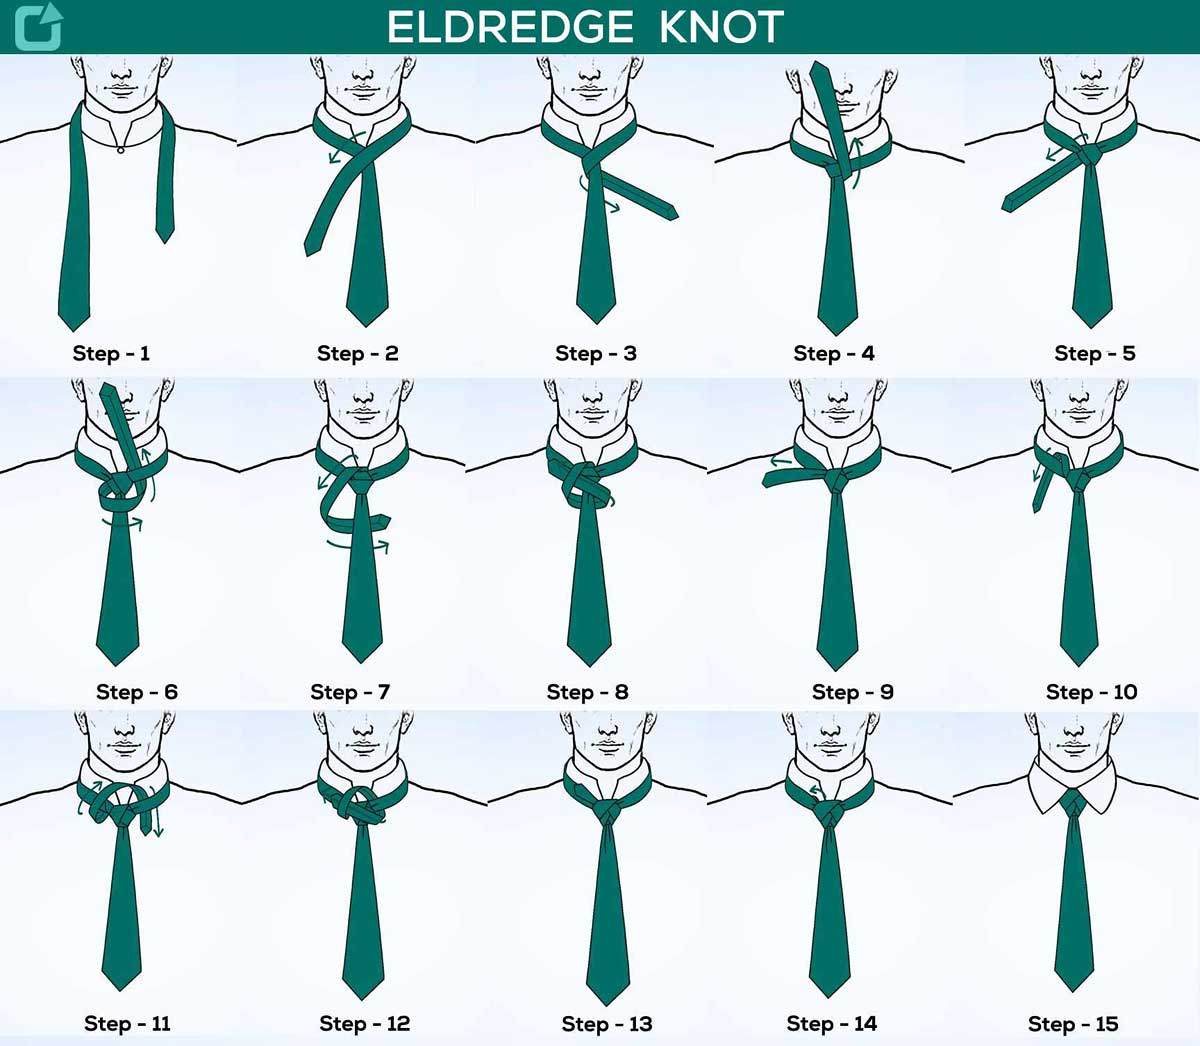 How to Tie the Eldredge Knot Step by Step Instructions - nexoye